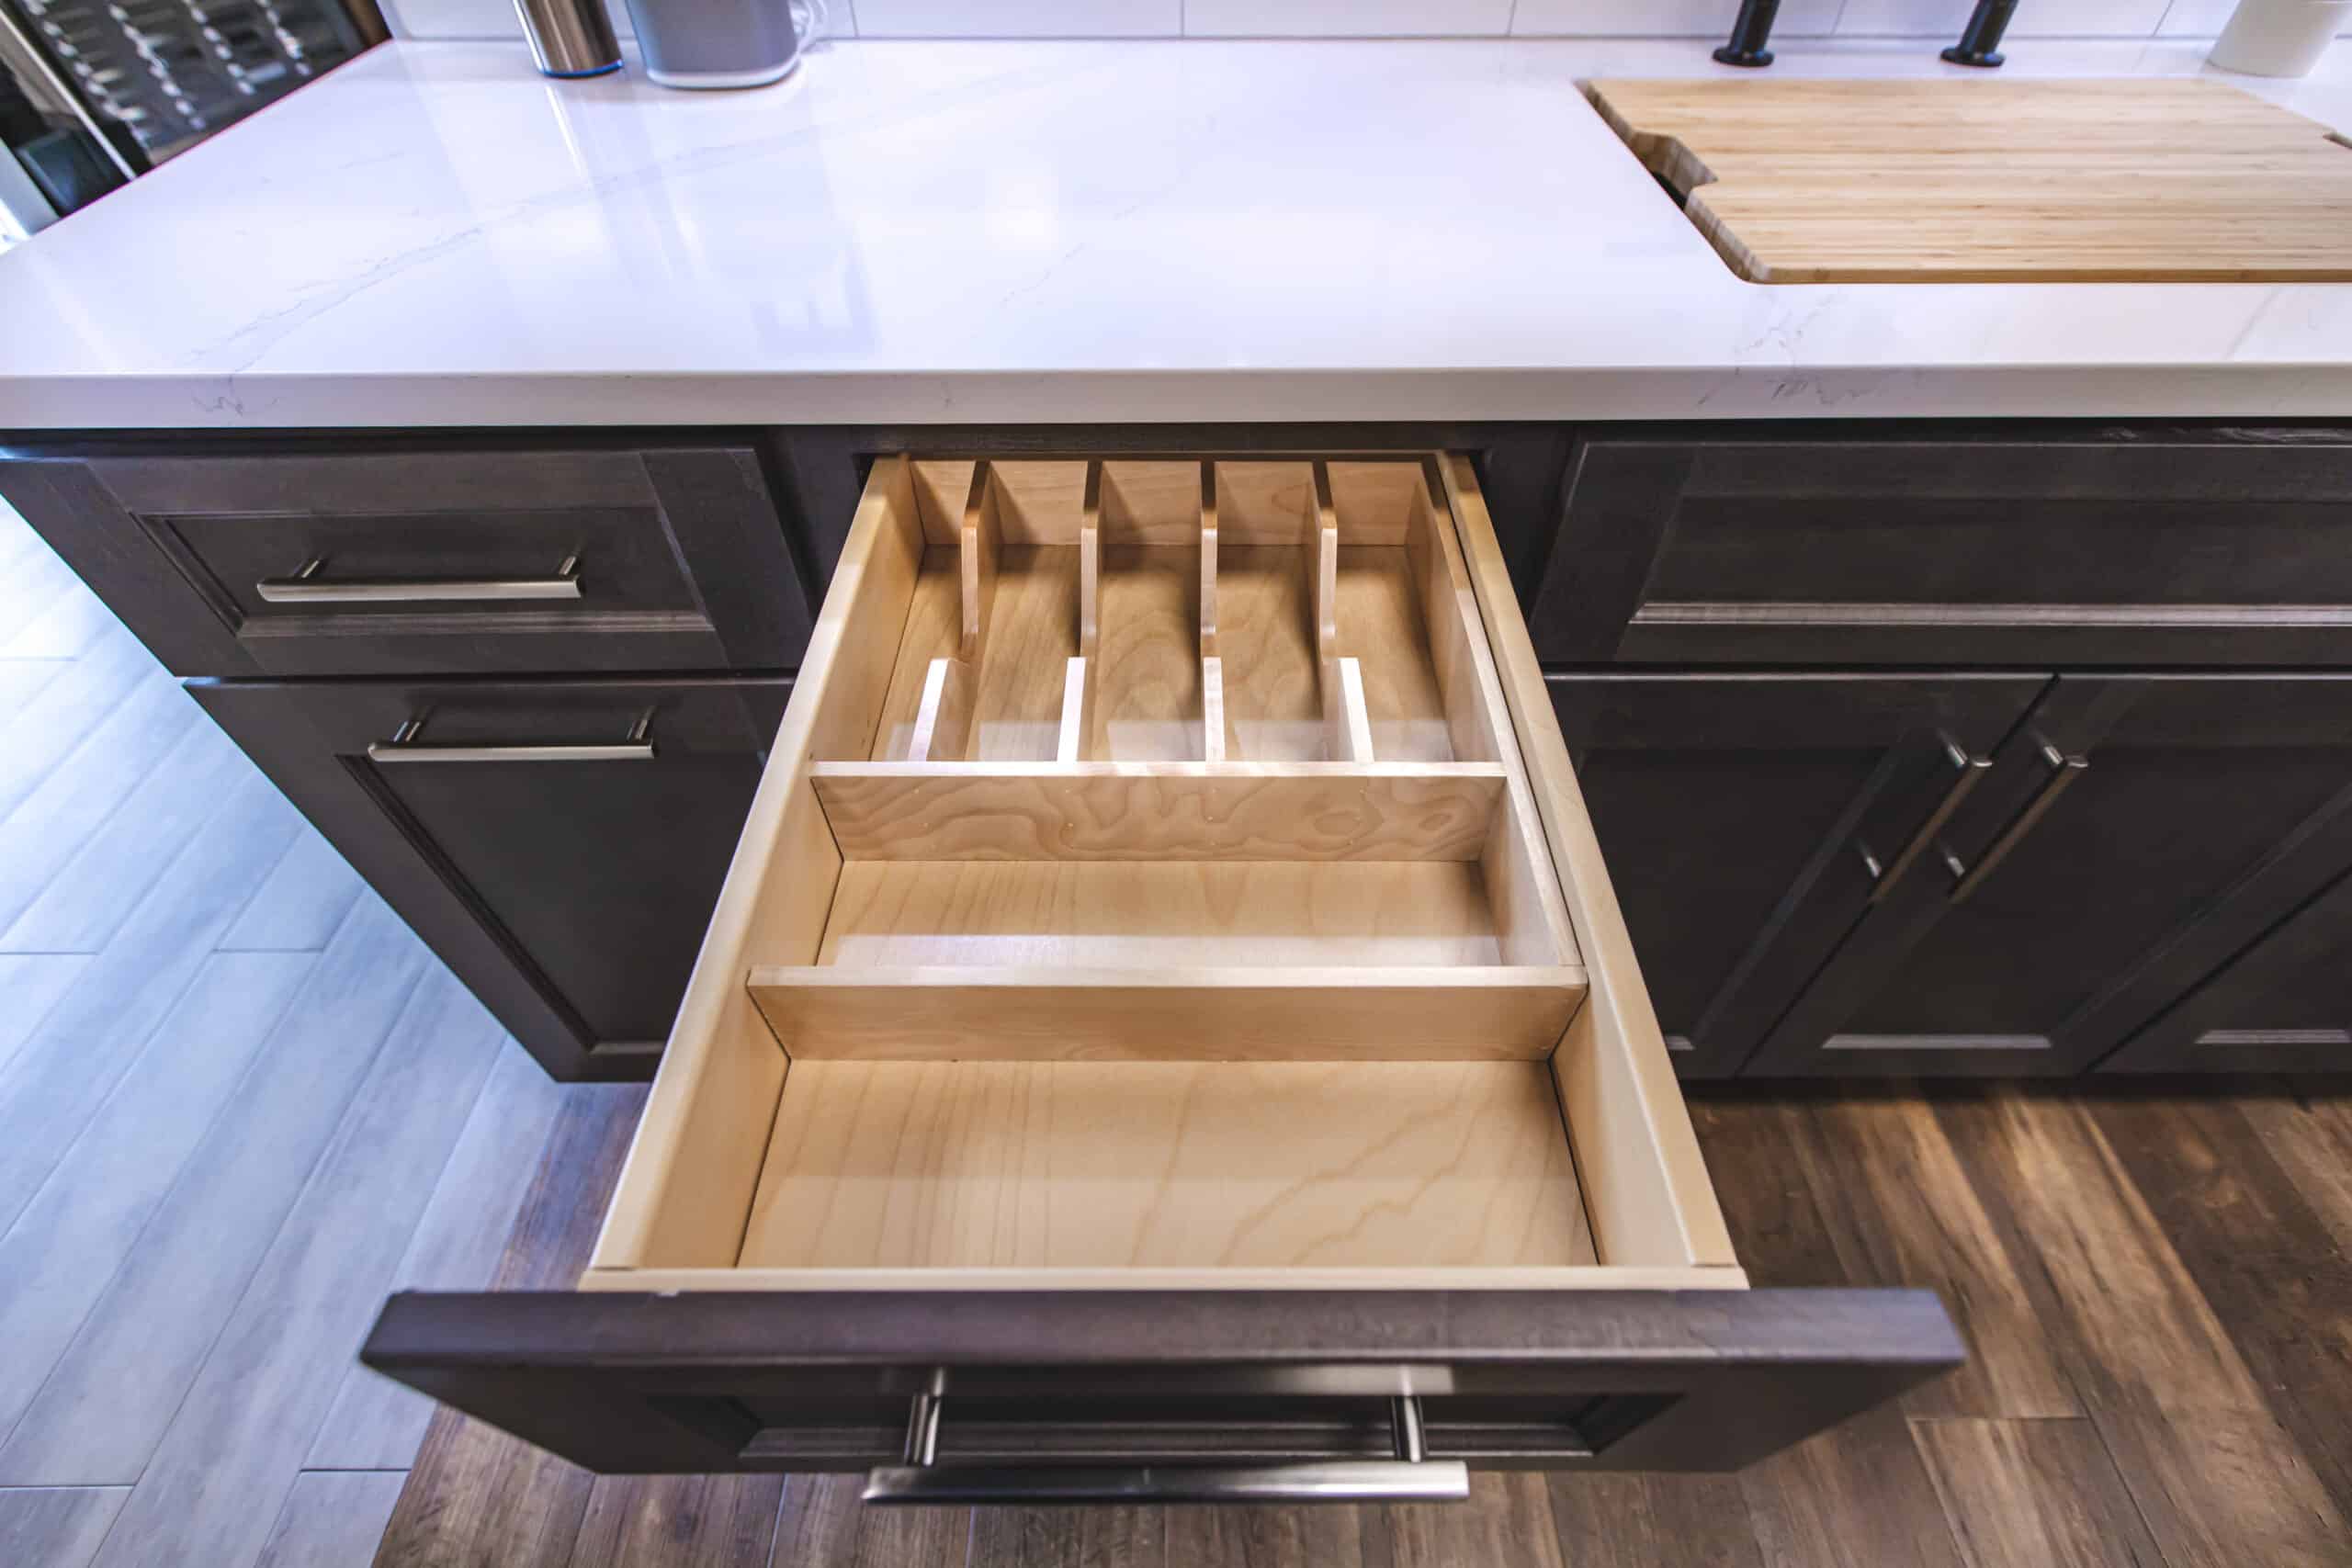 A kitchen with a wooden cutting board and a drawer